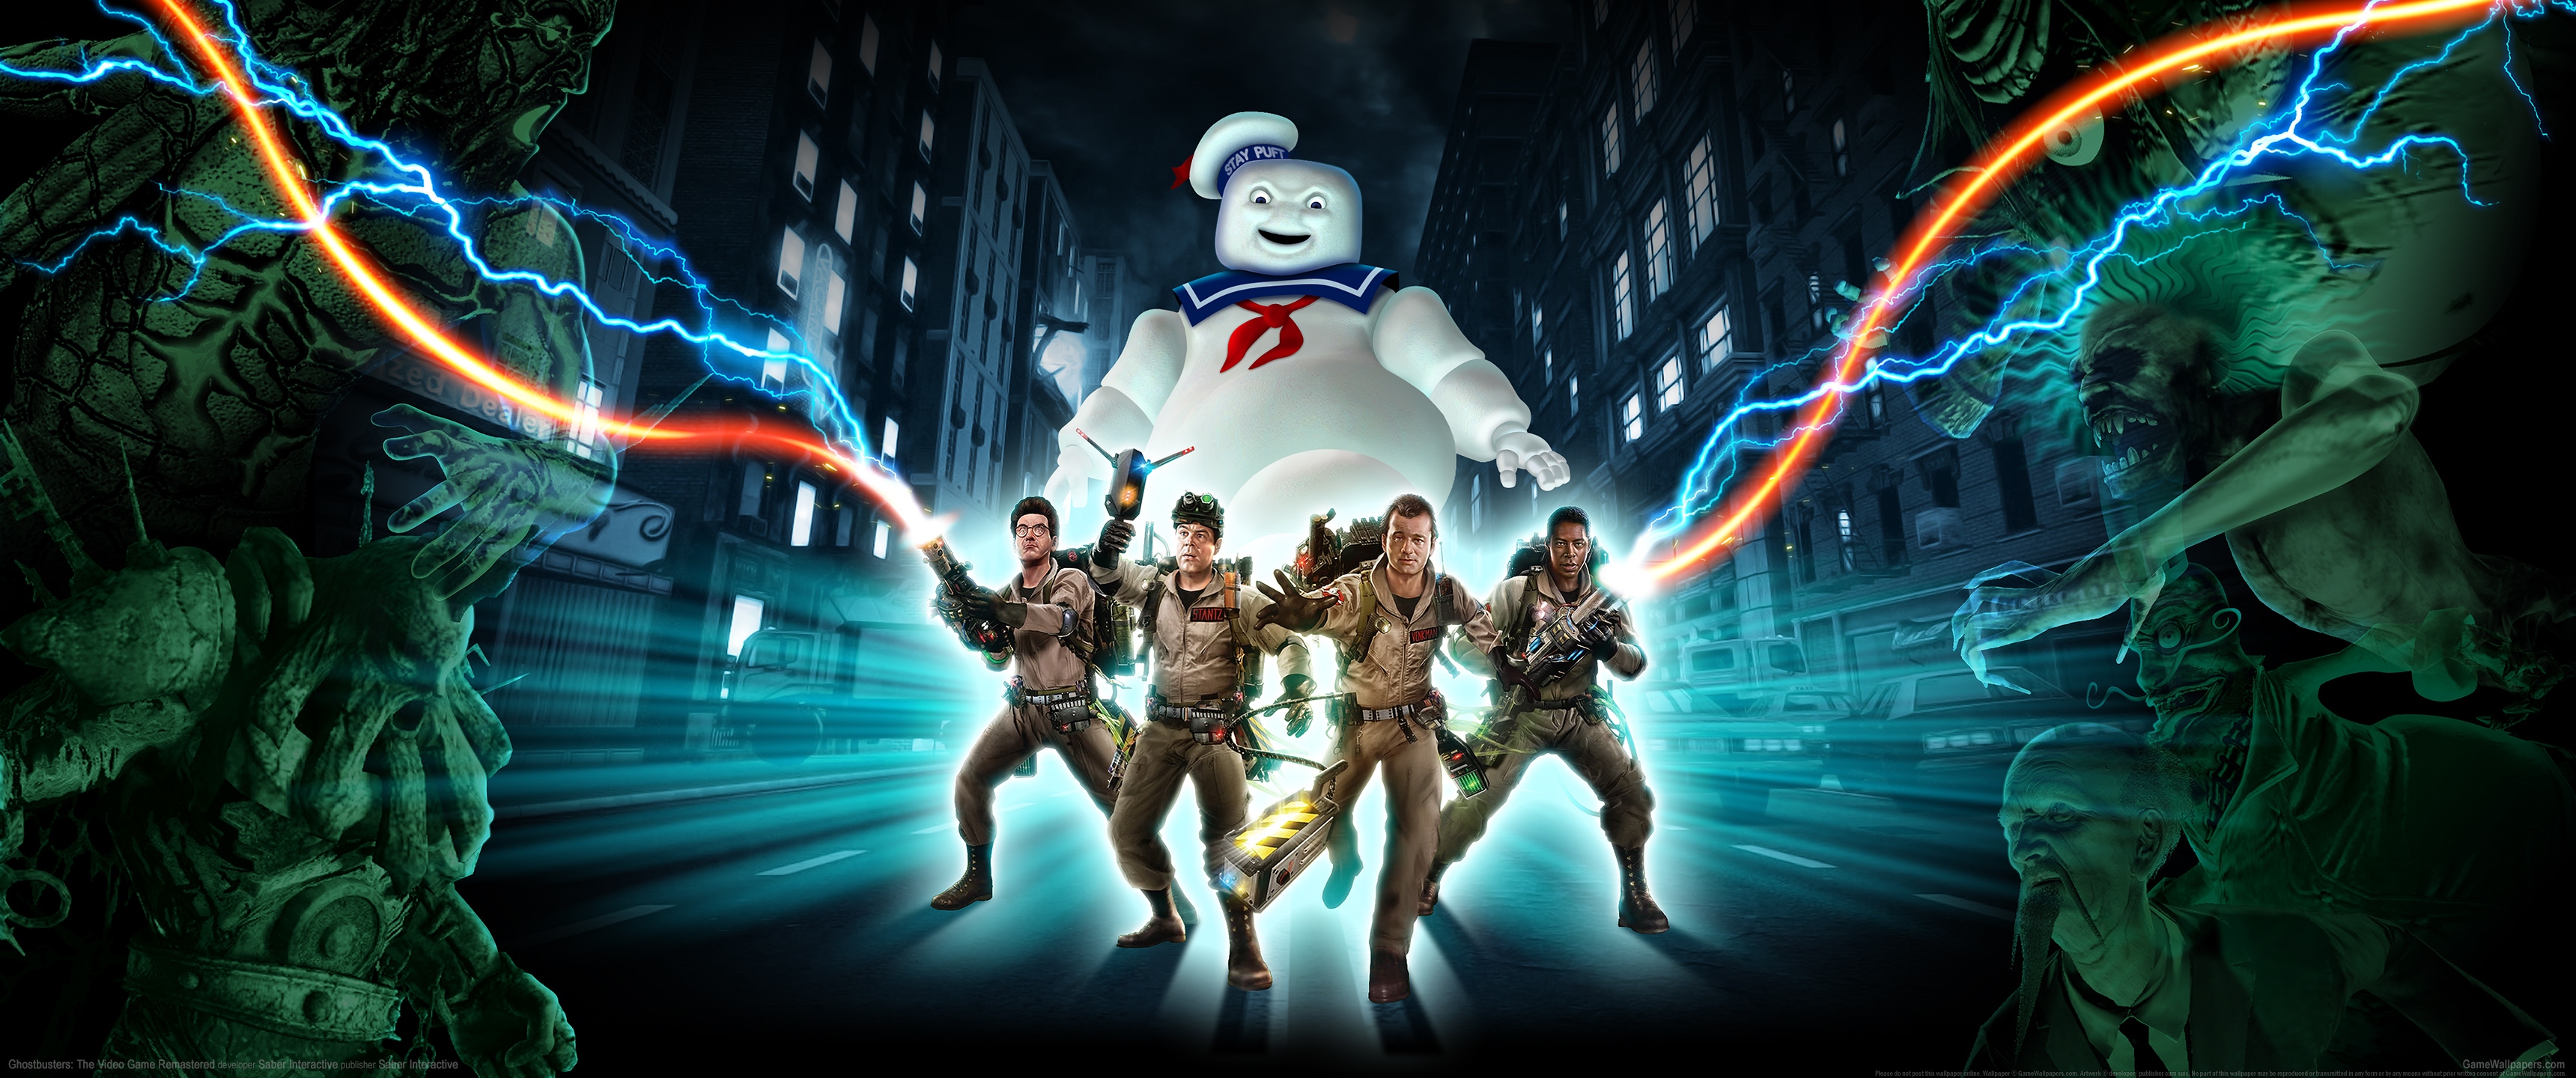 Ghostbusters: The Video Game Remastered 3440x1440 wallpaper or background 01